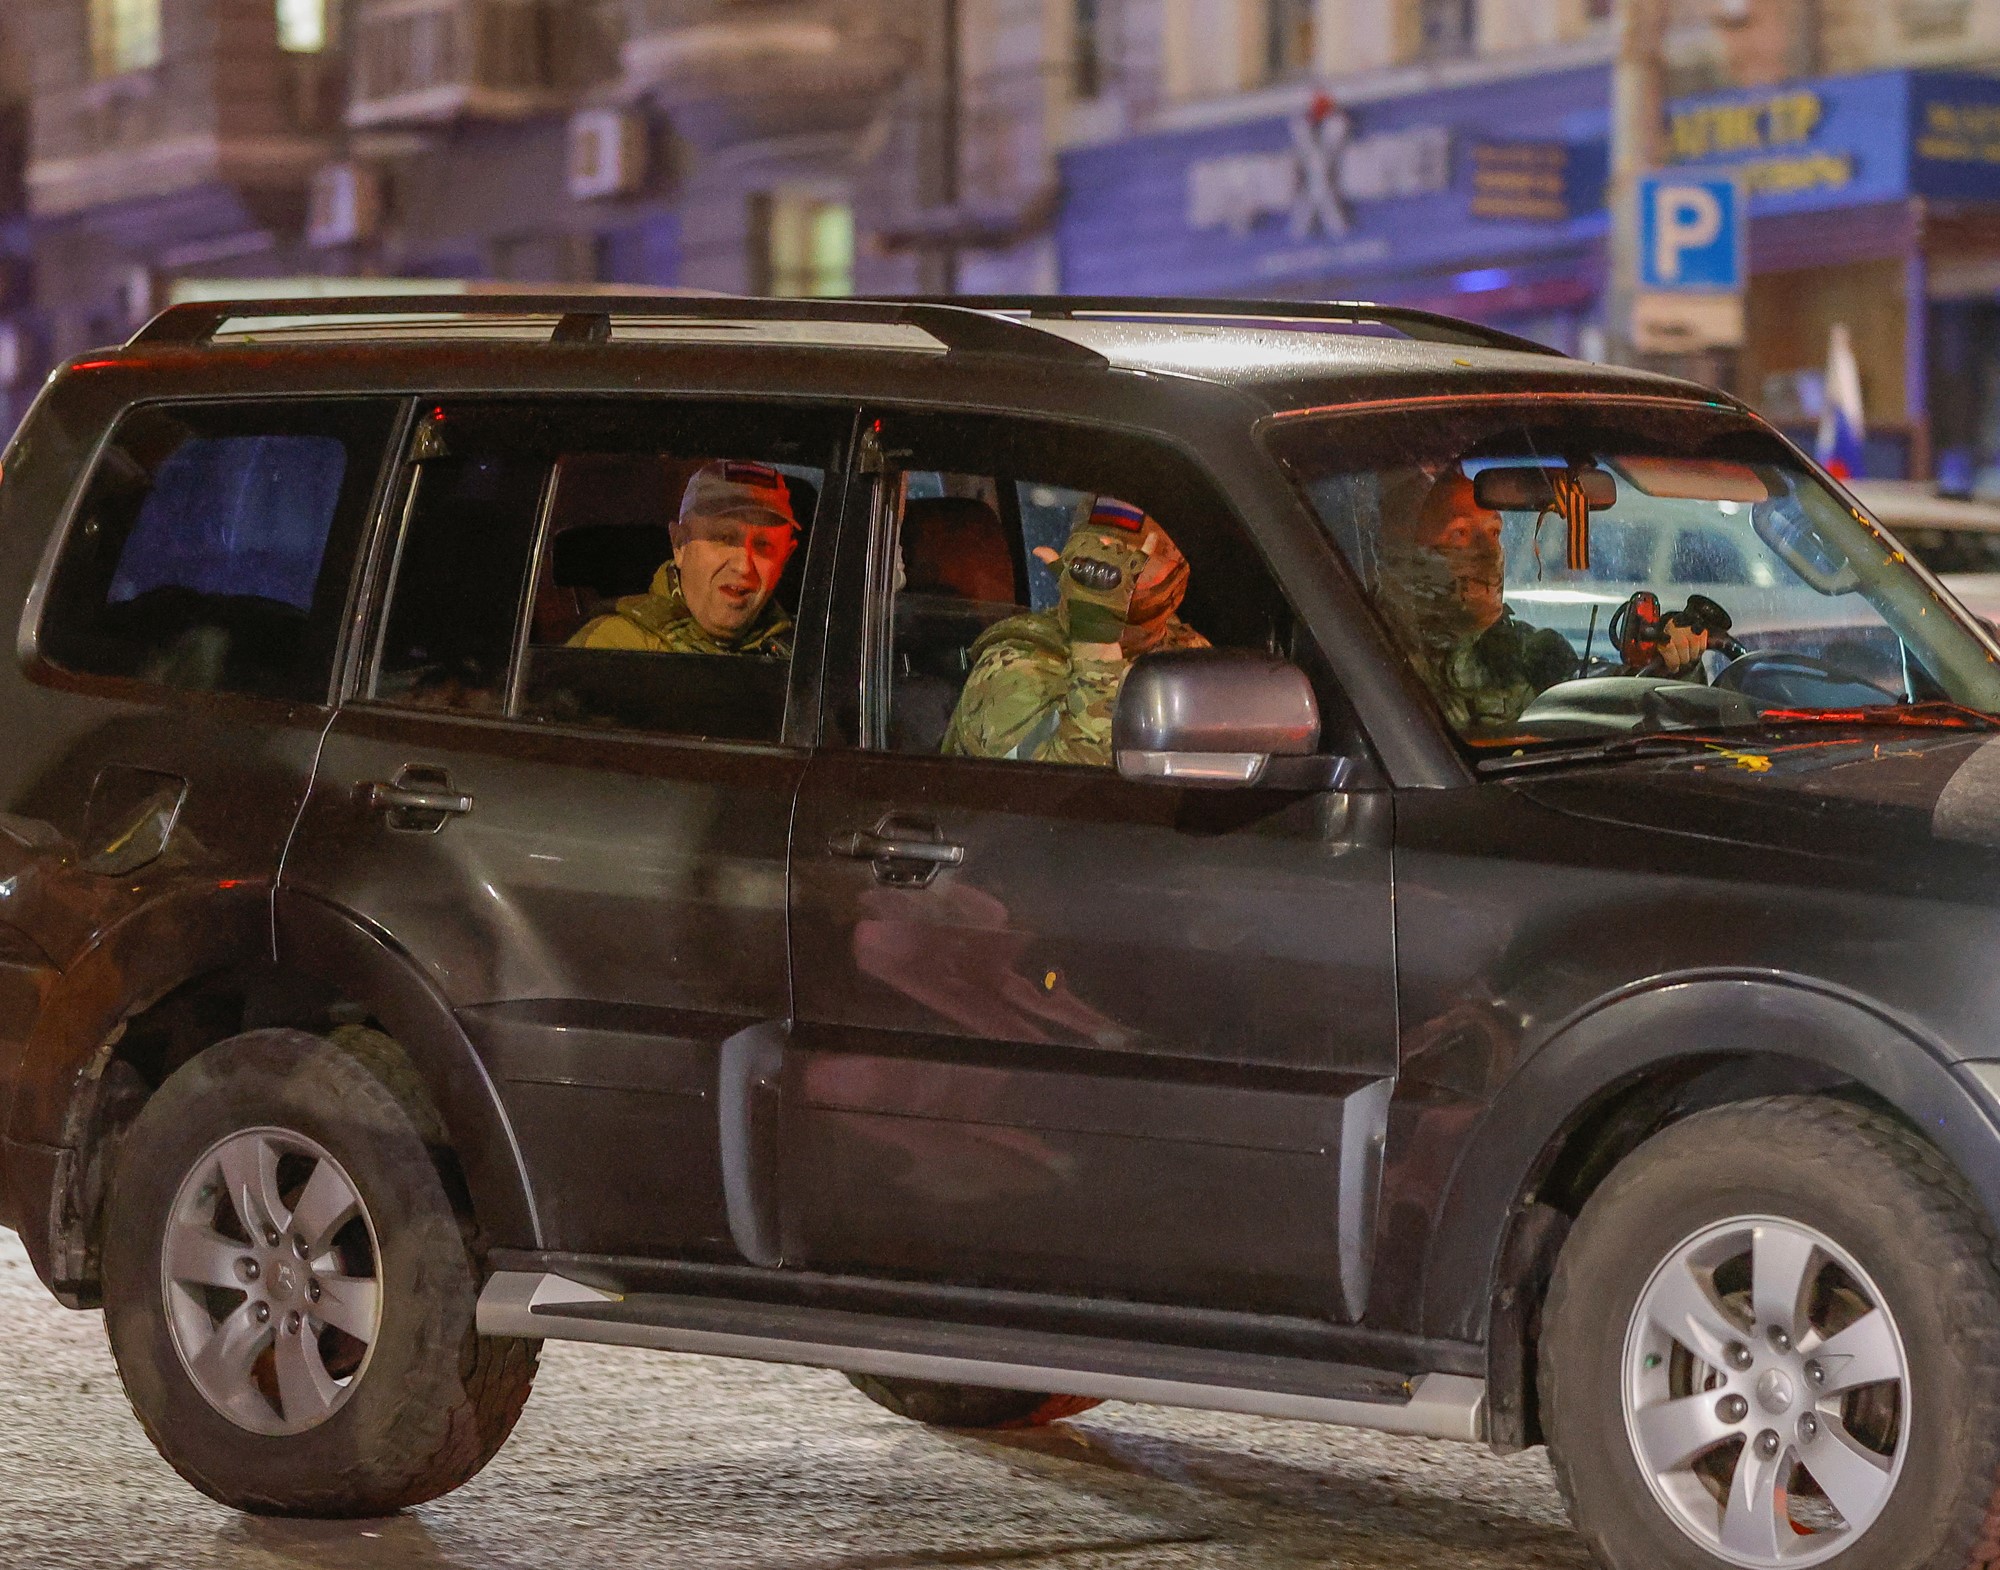 Yevgeny Prigozhin sits in the back of a car with two people in the front of the car in military gear.